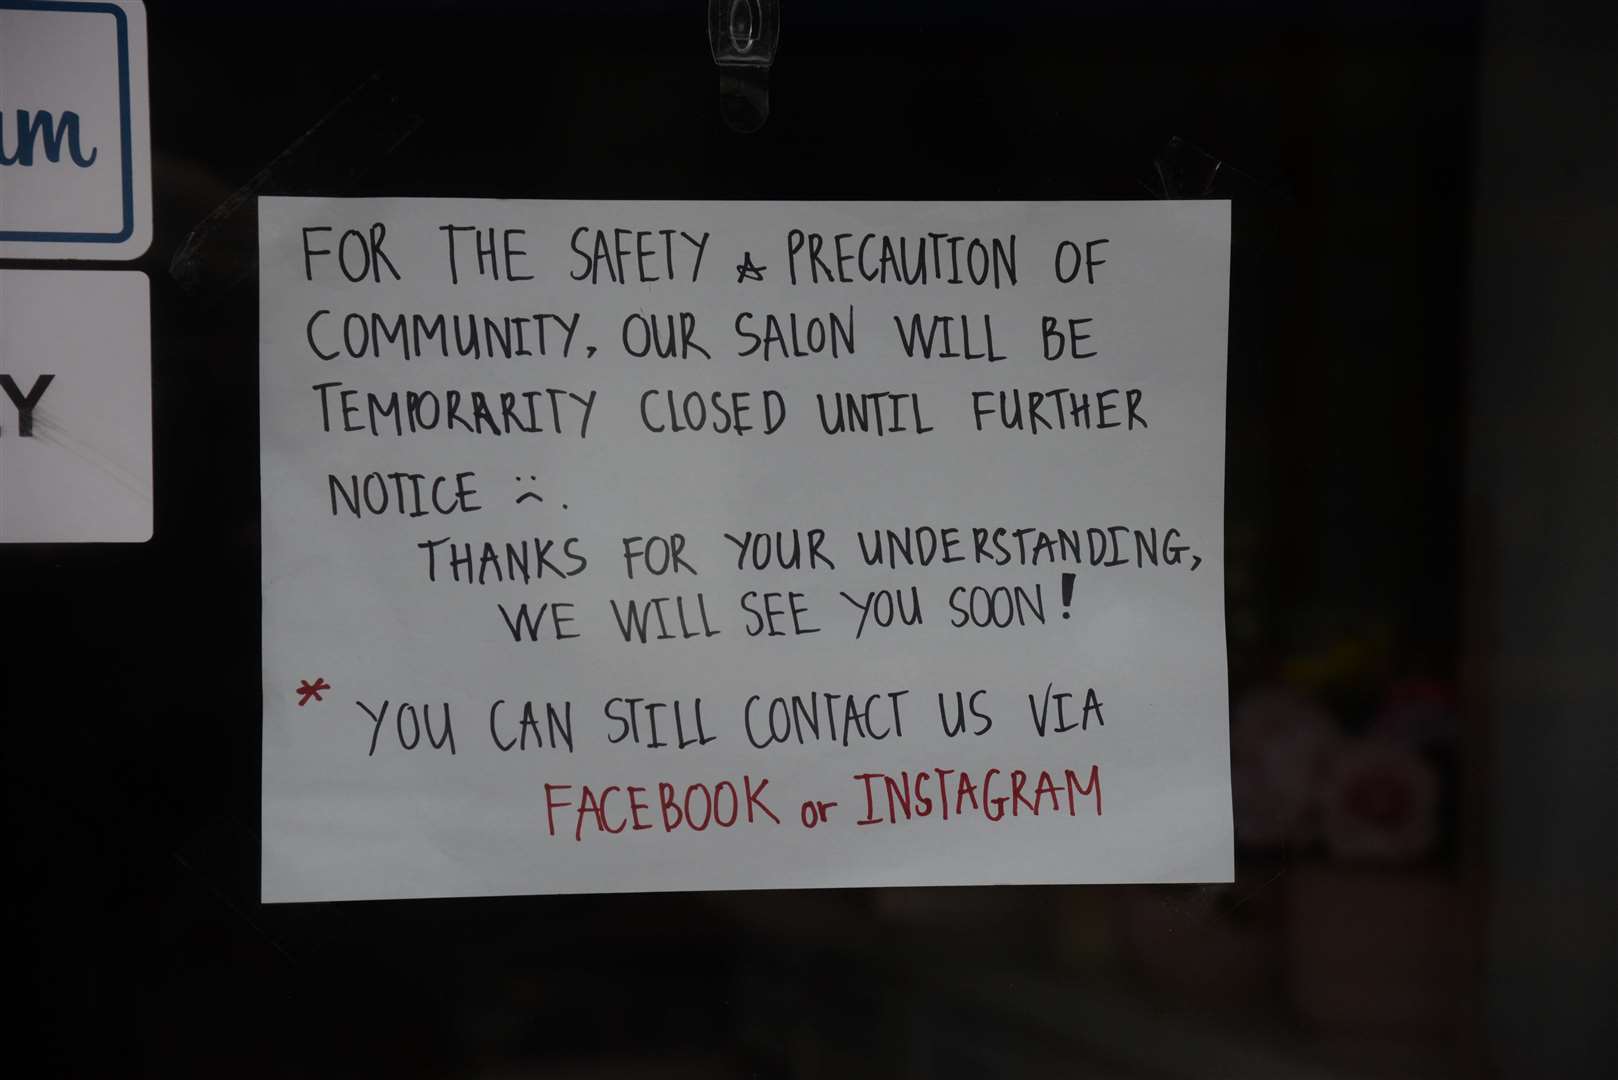 Many stores and businesses have had to close as a result of the restrictions